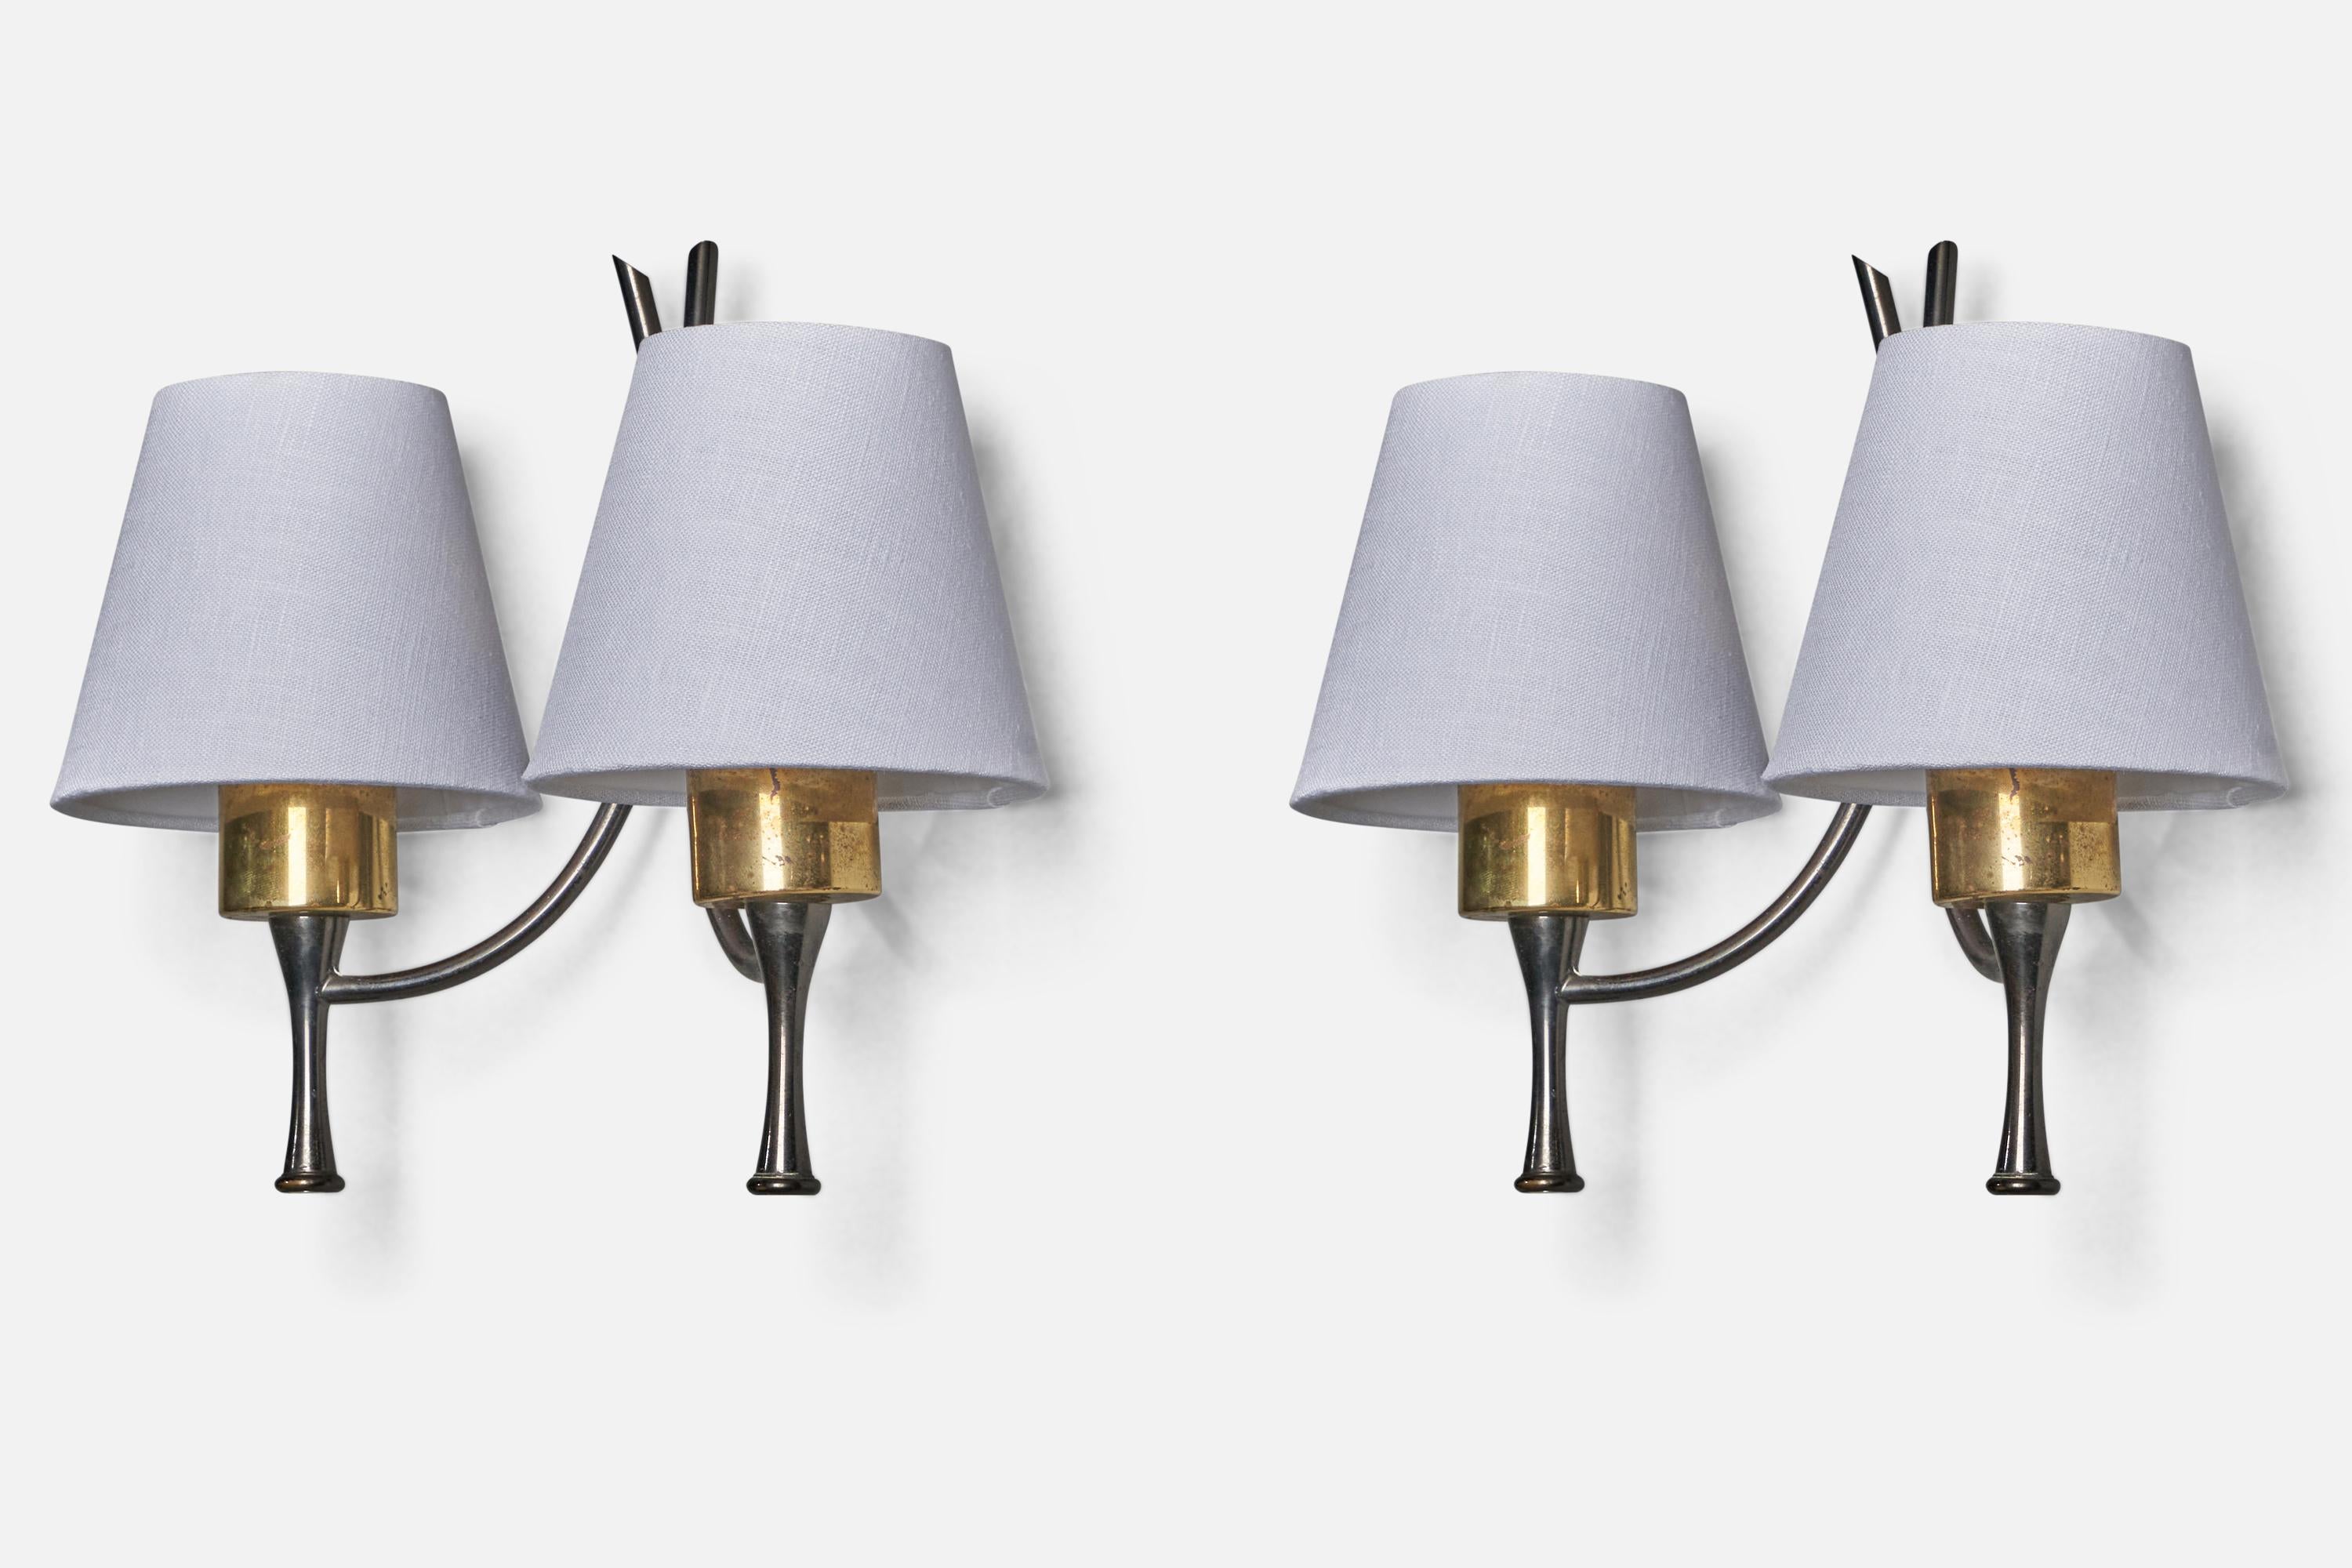 A pair of two-armed brass, black-lacquered metal and white fabric wall lights, designed and produced in Italy, 1950s.

Overall Dimensions: 10.5